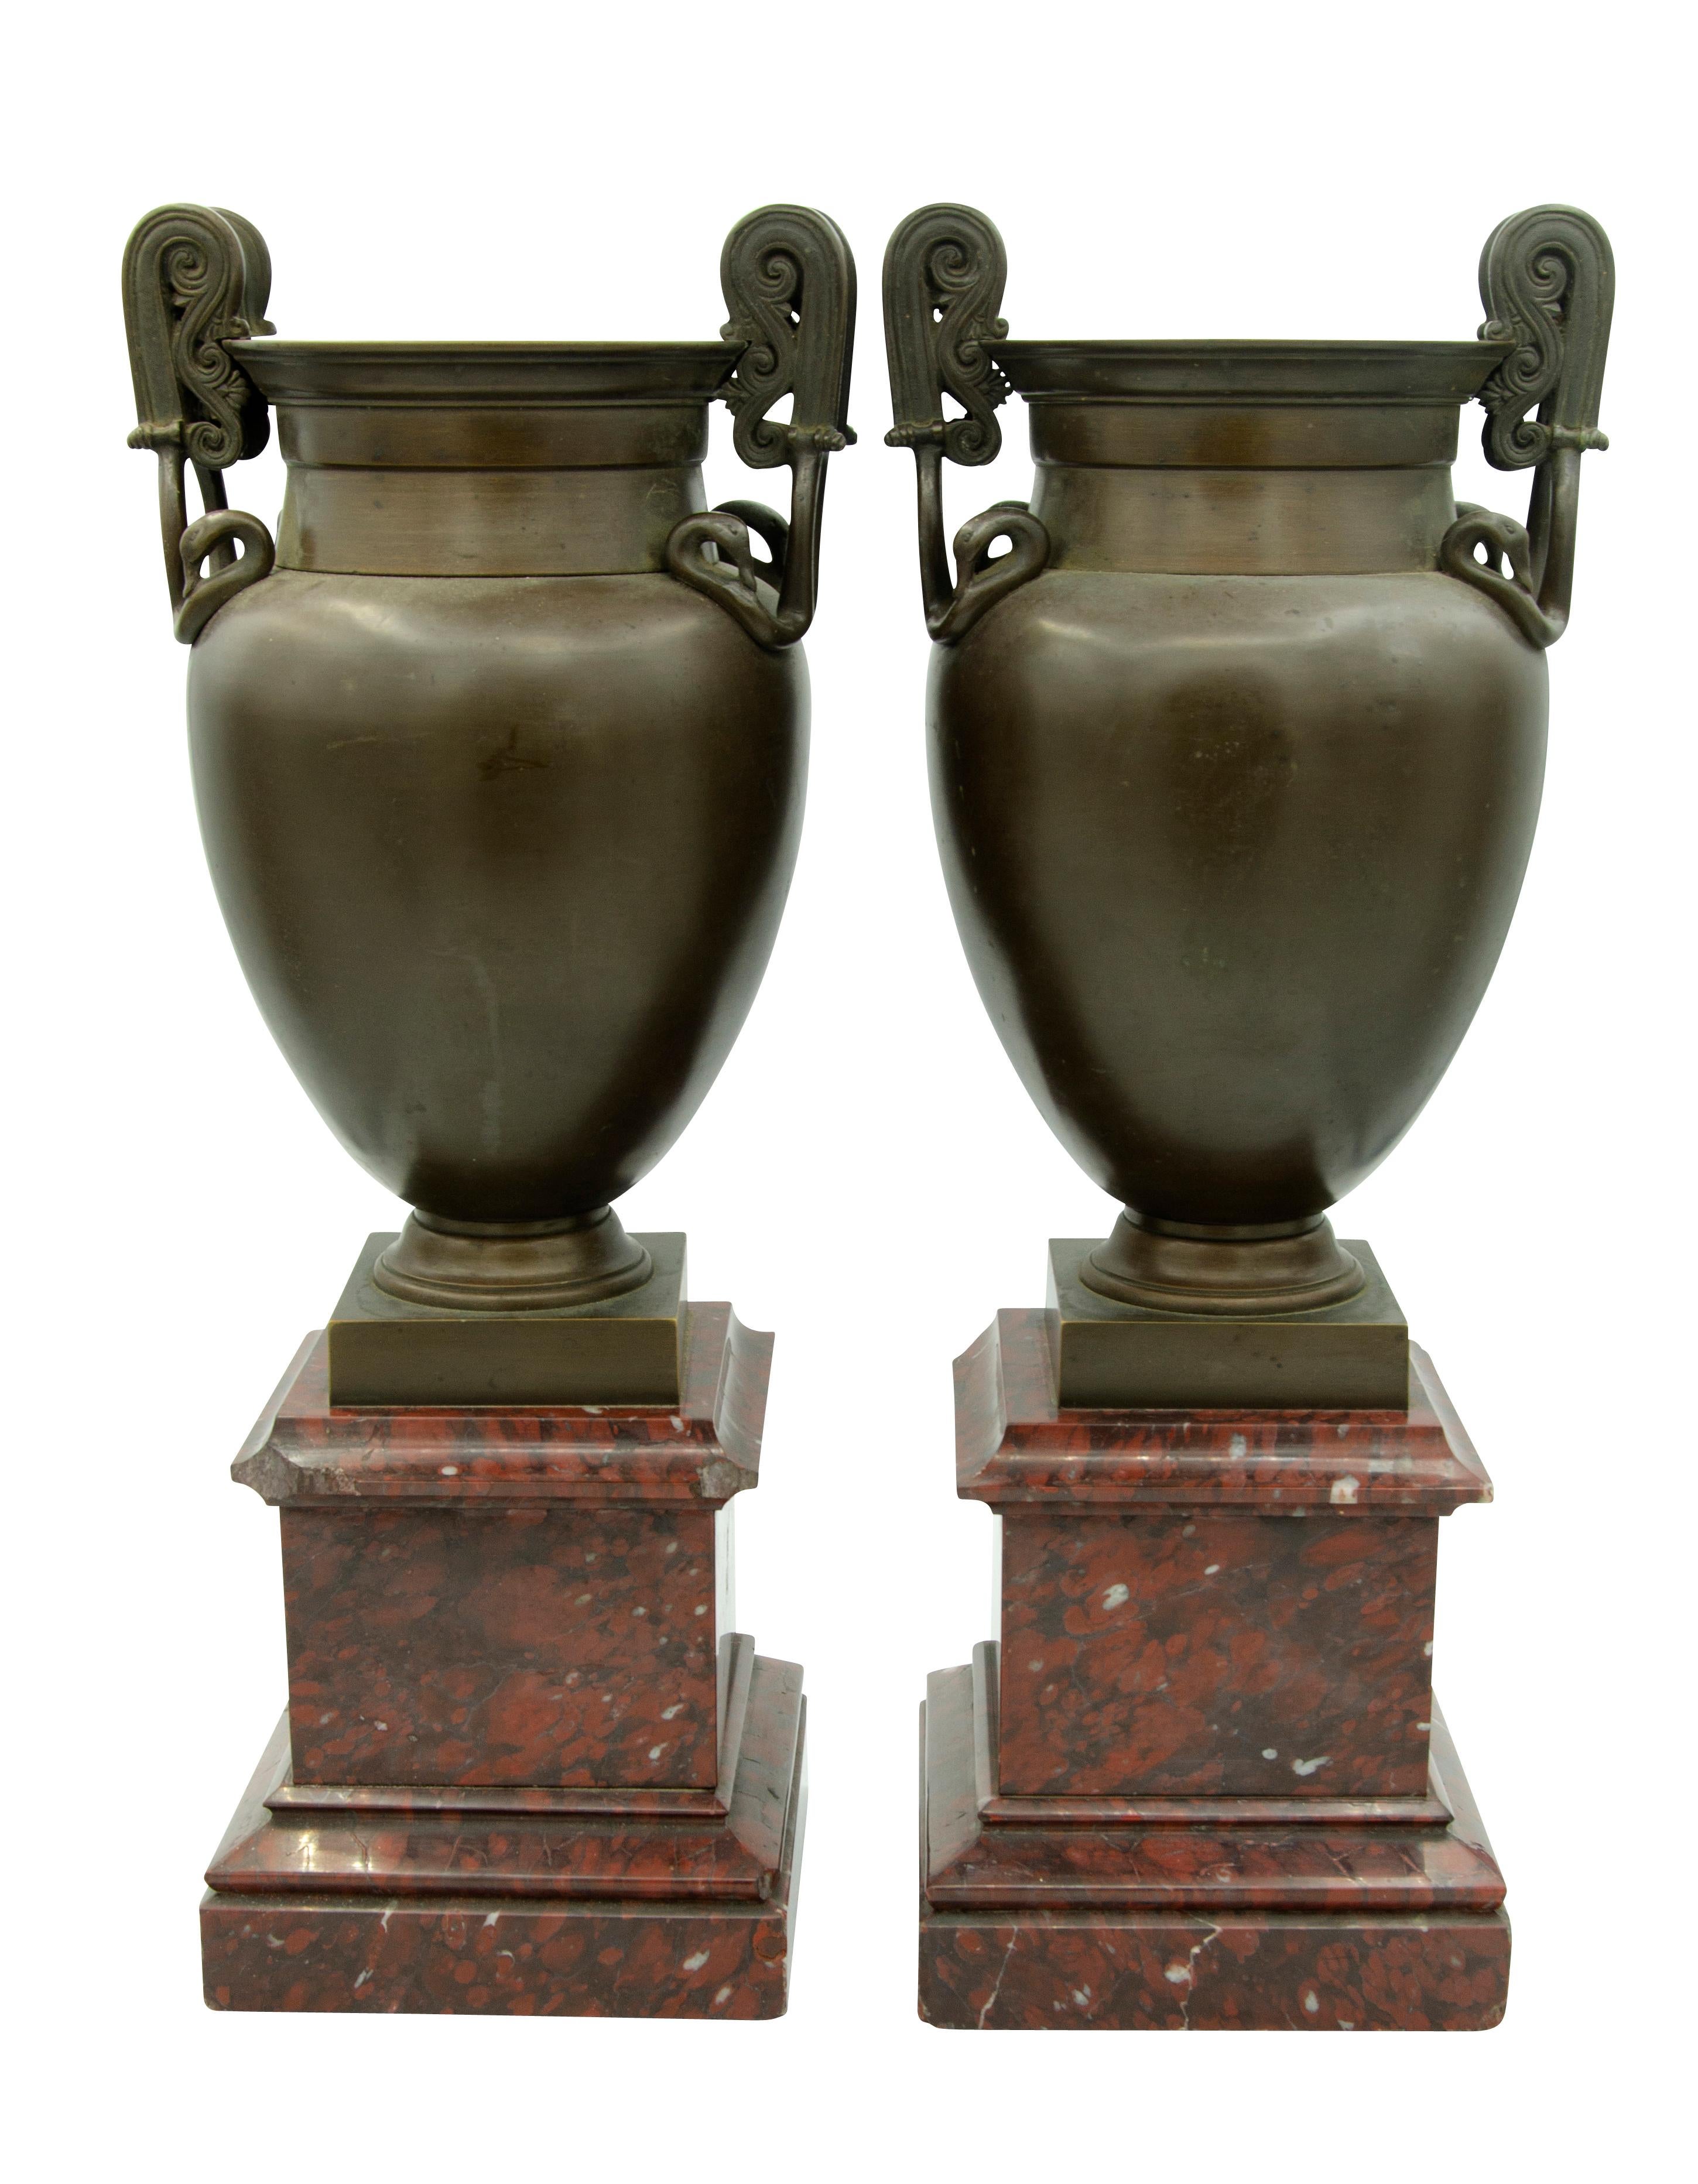 Pair of Grand Tour Greek Revival Bronze Urns on Marble Bases In Good Condition For Sale In Essex, MA